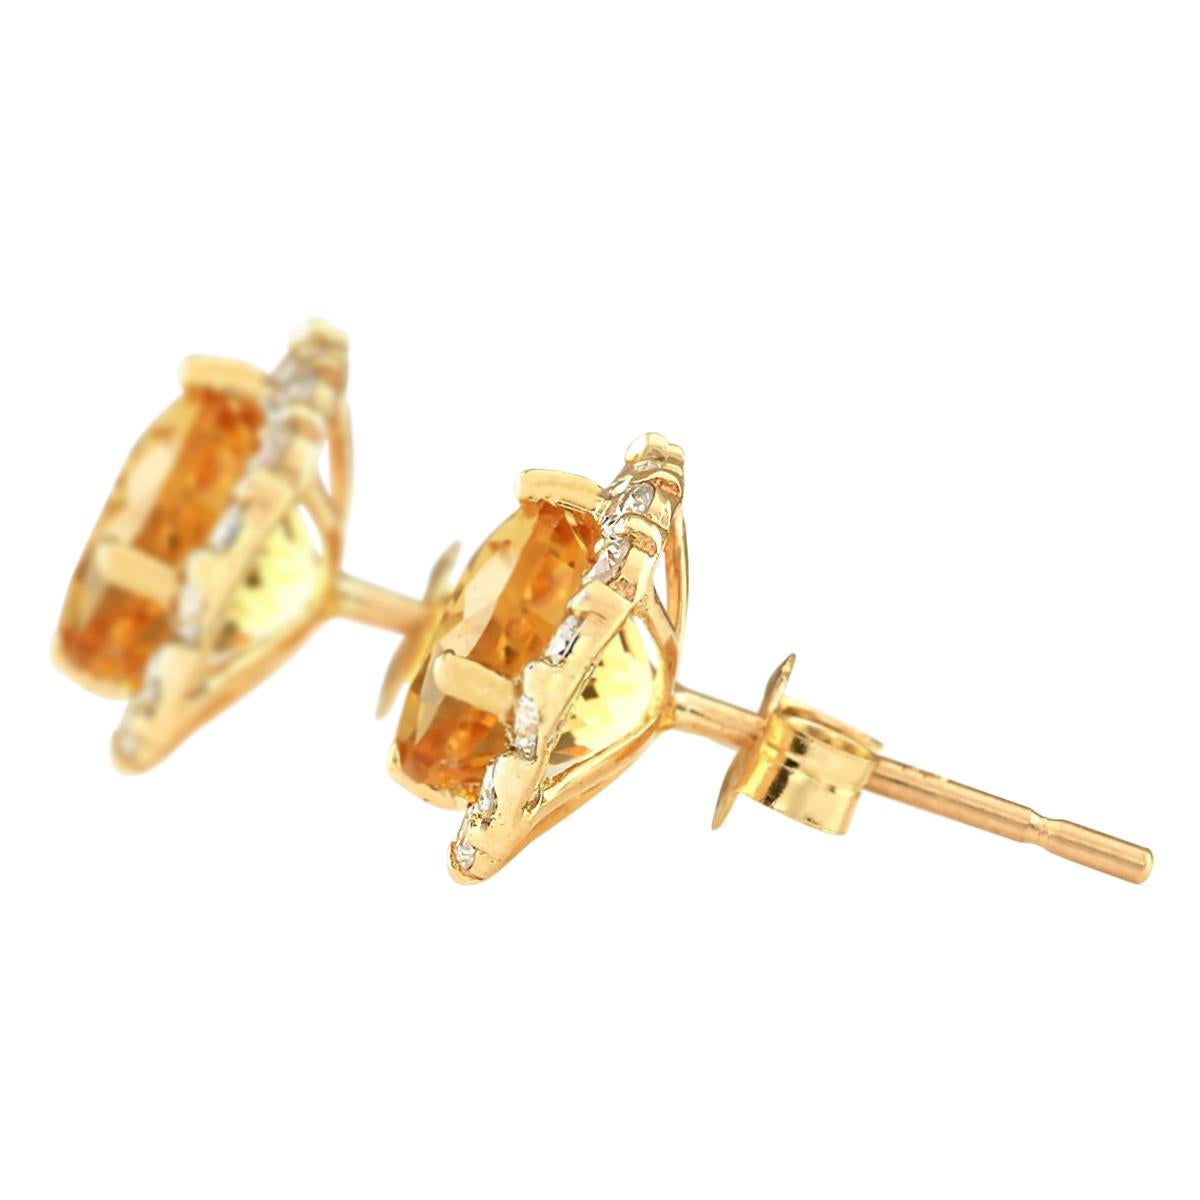 3.65 Carat Natural Citrine 14 Karat Yellow Gold Diamond Earrings
Stamped: 14K Yellow Gold
Total Earrings Weight: 2.0 Grams
Total Natural Citrine Weight is 3.00 Carat (Measures: 7.00x7.00 mm)
Color: Orange
Total Natural Diamond Weight is 0.65